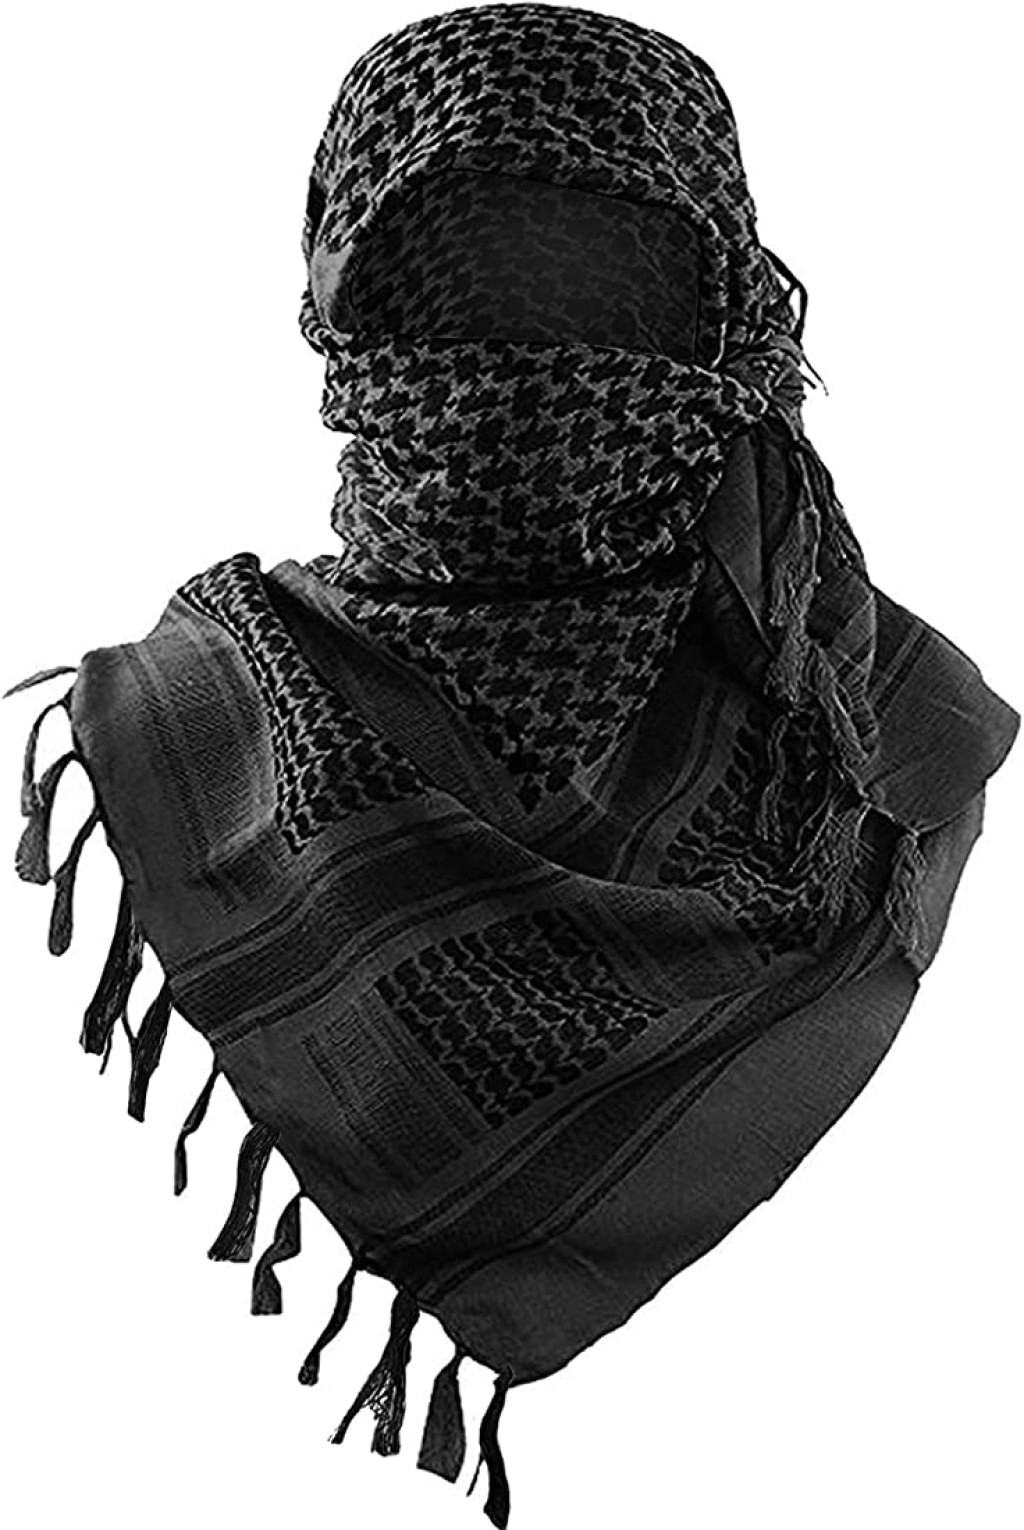 Picture of: Luxns Military Shemagh Tactical Desert Scarf / % Cotton Keffiyeh Scarf  Wrap for Men and Women